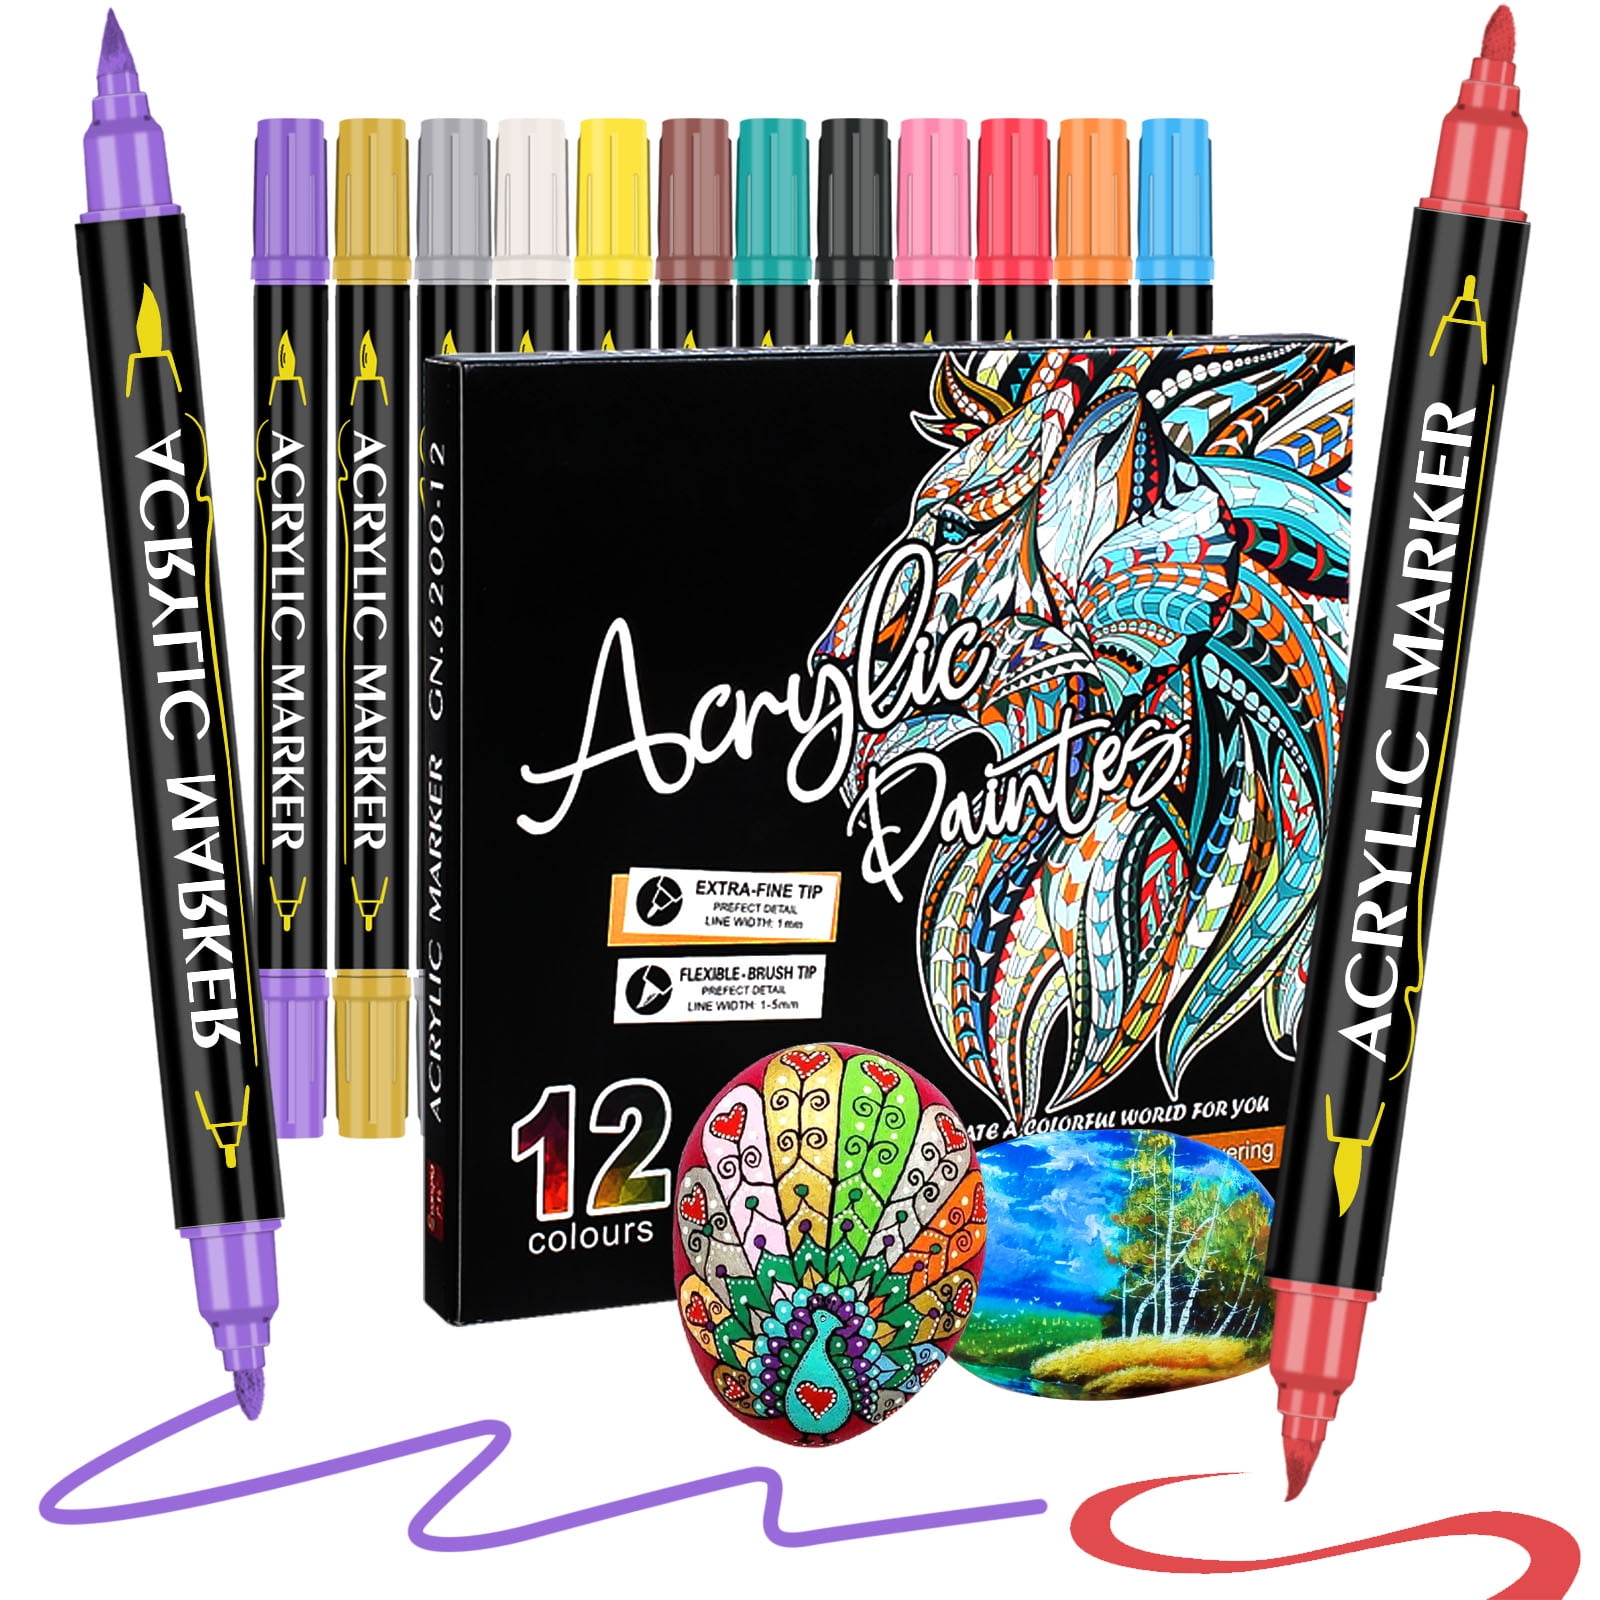  ARTISTRO 12 Acrylic Paint Markers Medium Tip and 16 Acrylic  Paint Pens Brush Tip, Bundle for Calligraphy, Scrapbooking, Brush  Lettering, Card Making, Sketching, Black Paper, Rock Painting, Ceramics :  אמנות, יצירה ותפירה